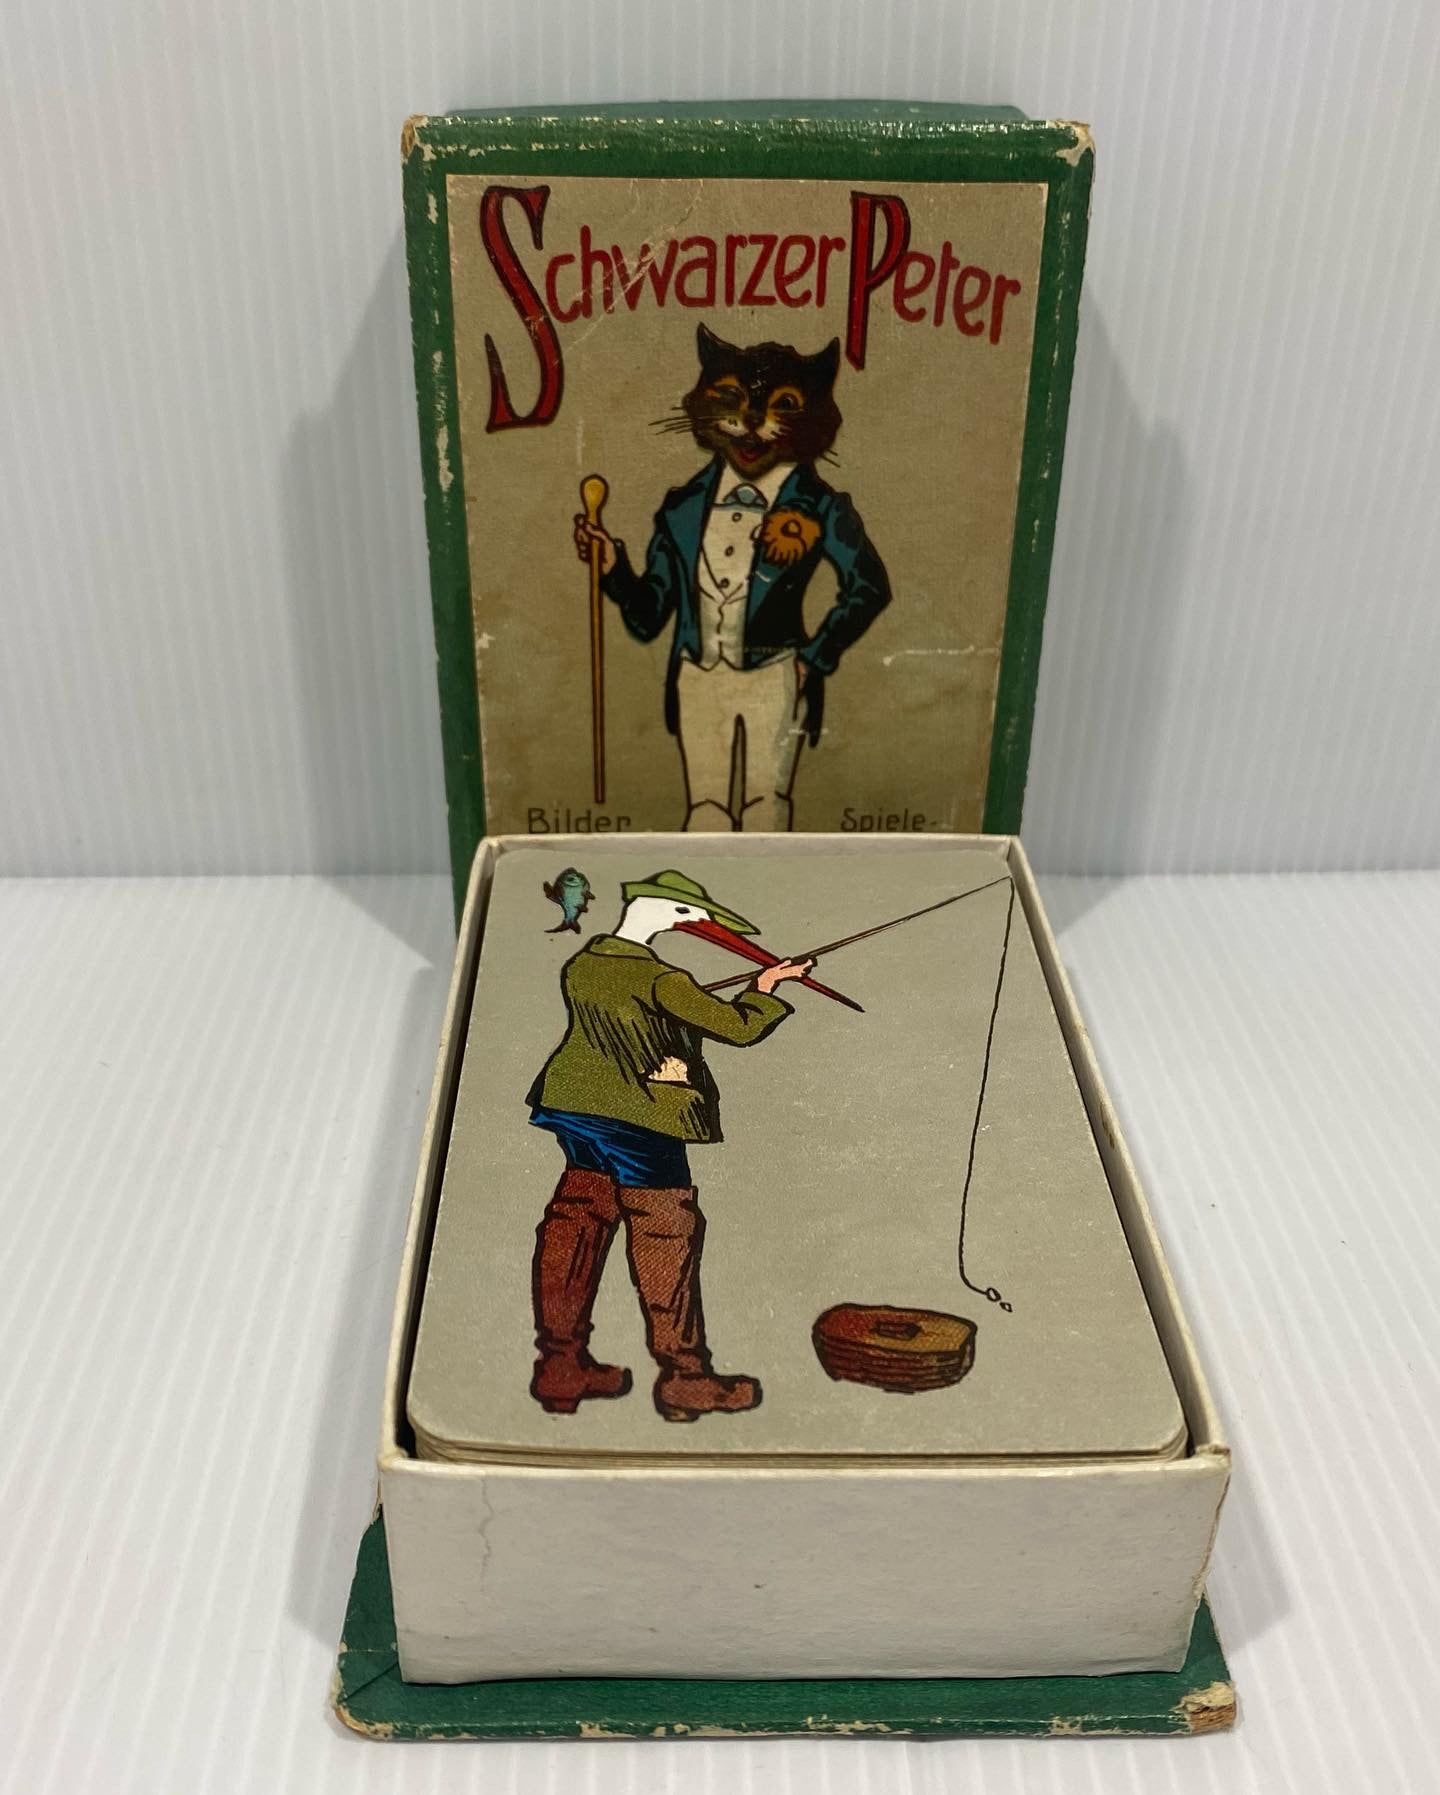 Antique German Playing Cards, Schwarzer Peter playing cards. Forty-five cards and instructions (German language) with original Box.